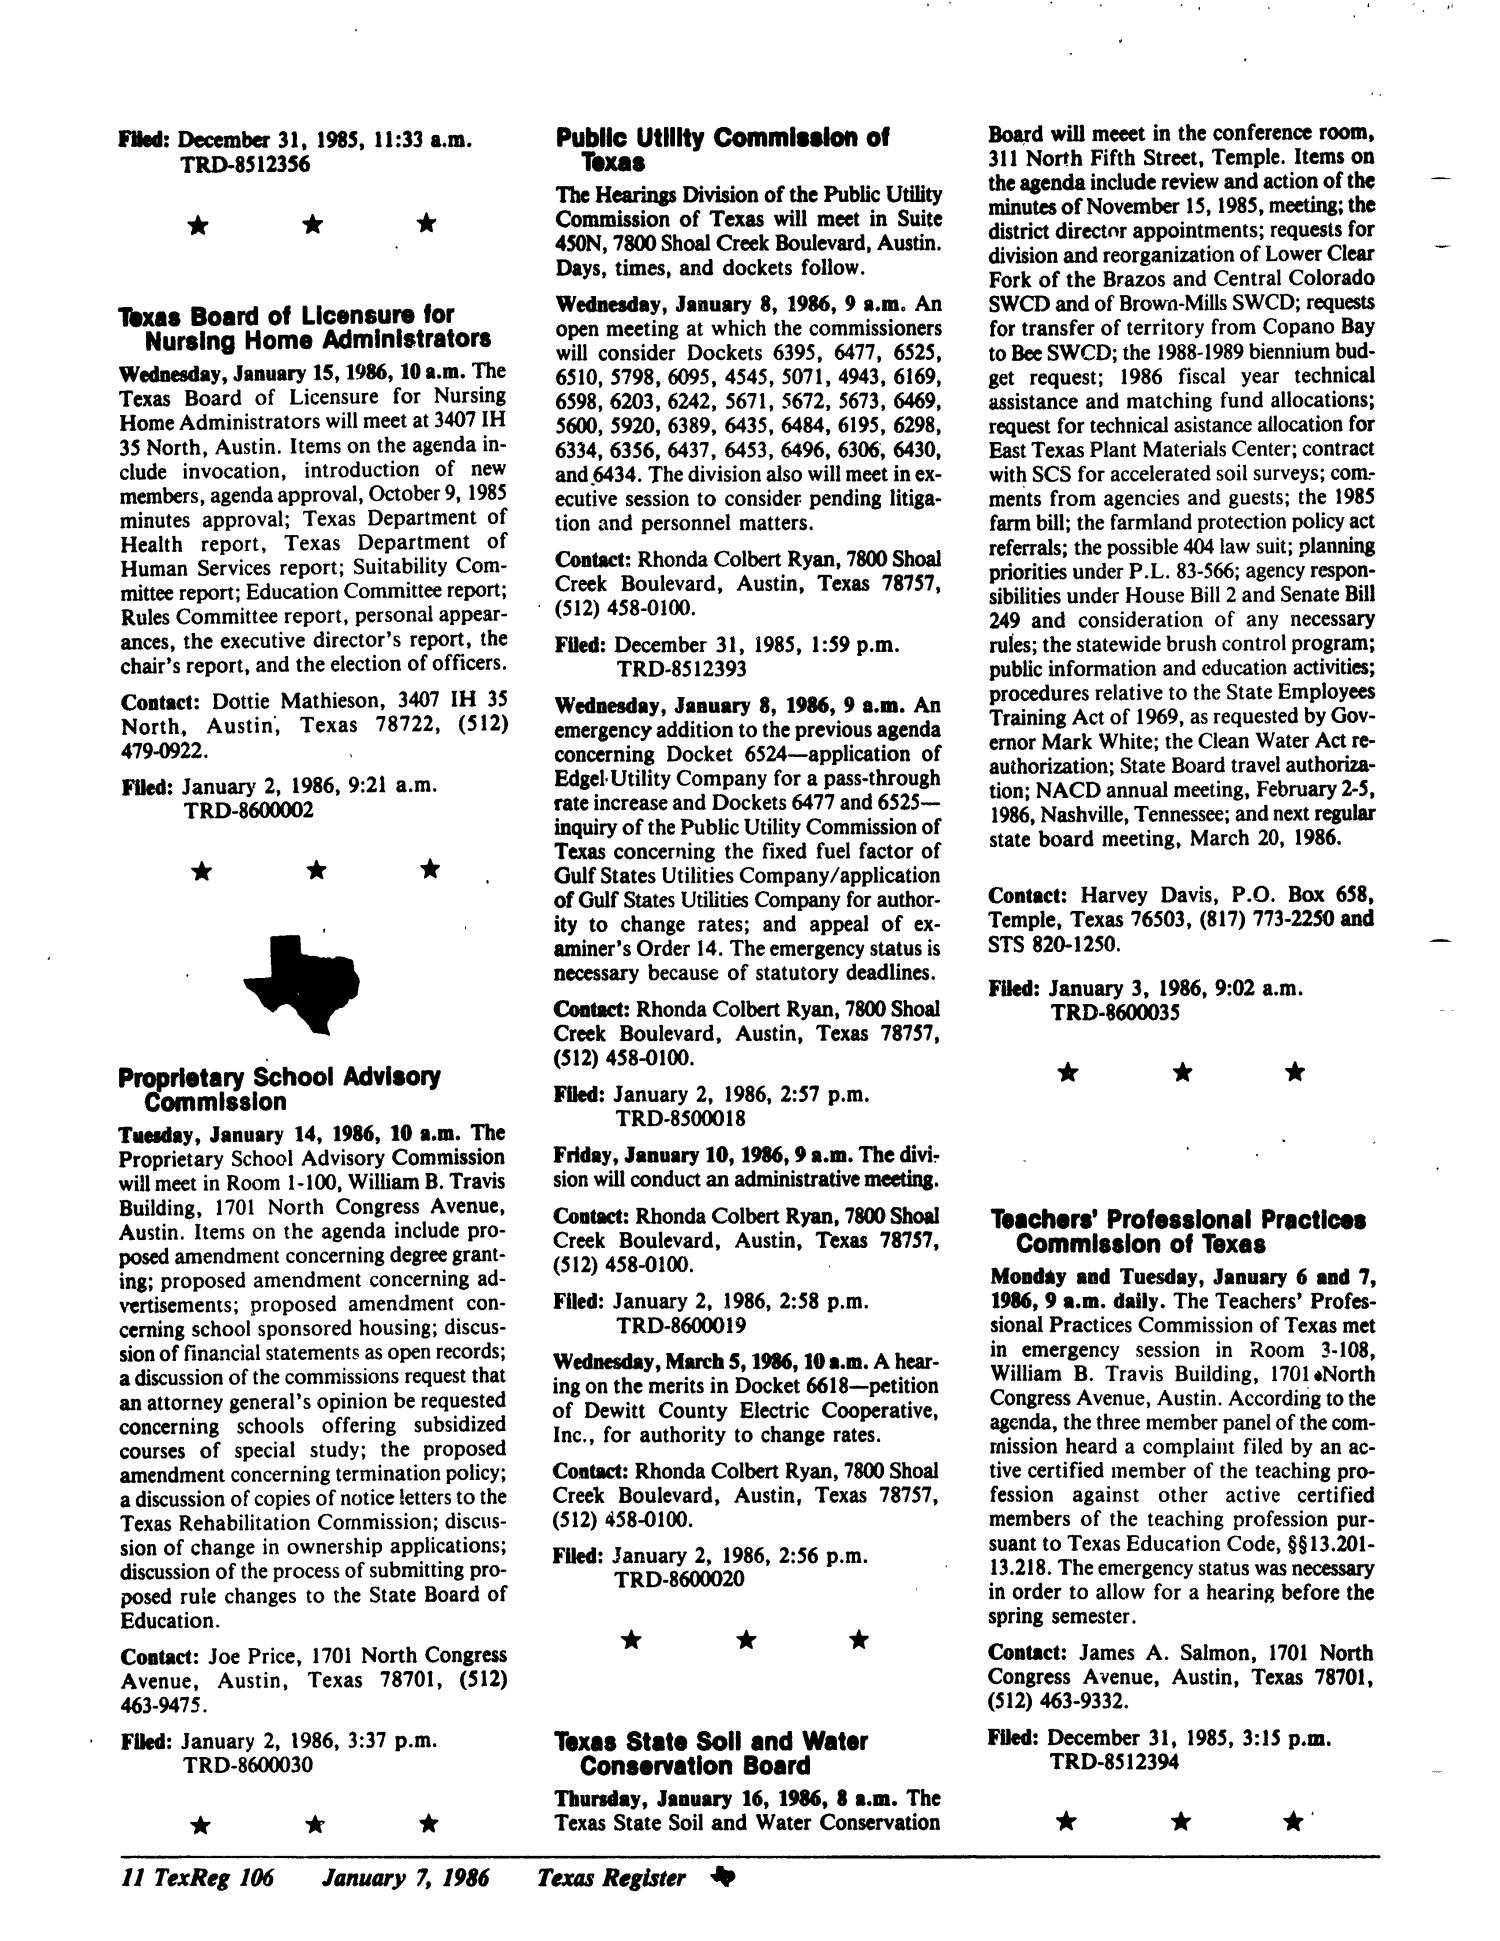 Texas Register, Volume 11, Number 2, Pages 81-106, January 7, 1986
                                                
                                                    106
                                                